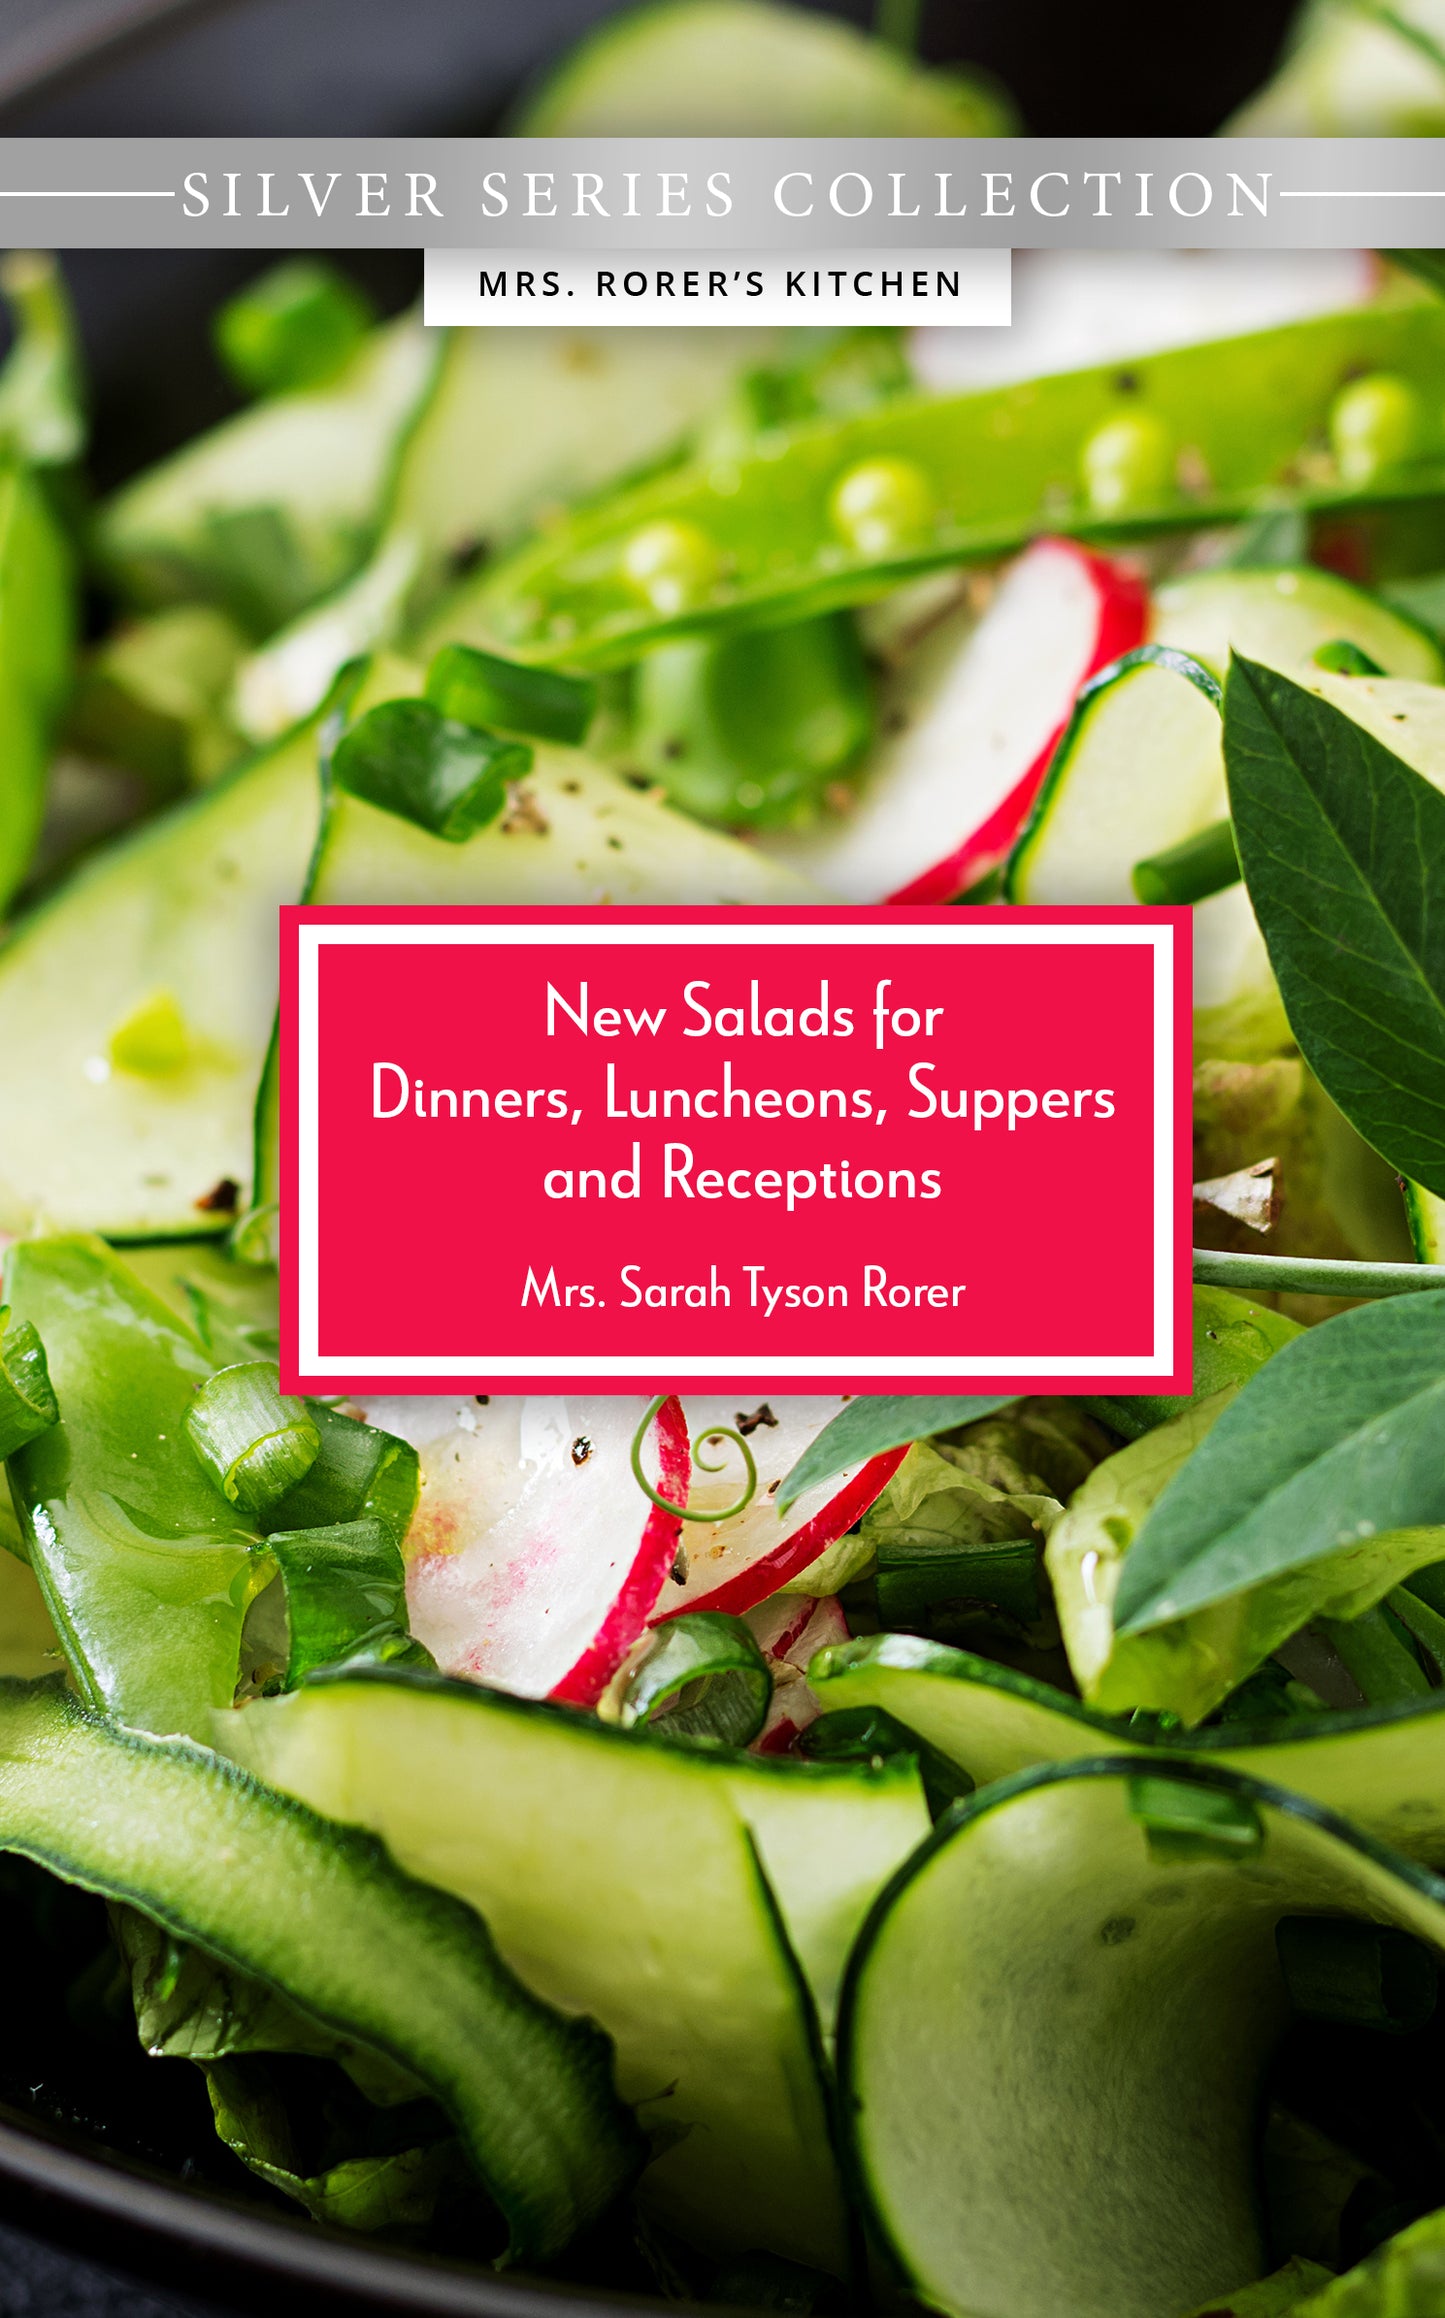 New Salads for Diners, Luncheons, Suppers & Receptions